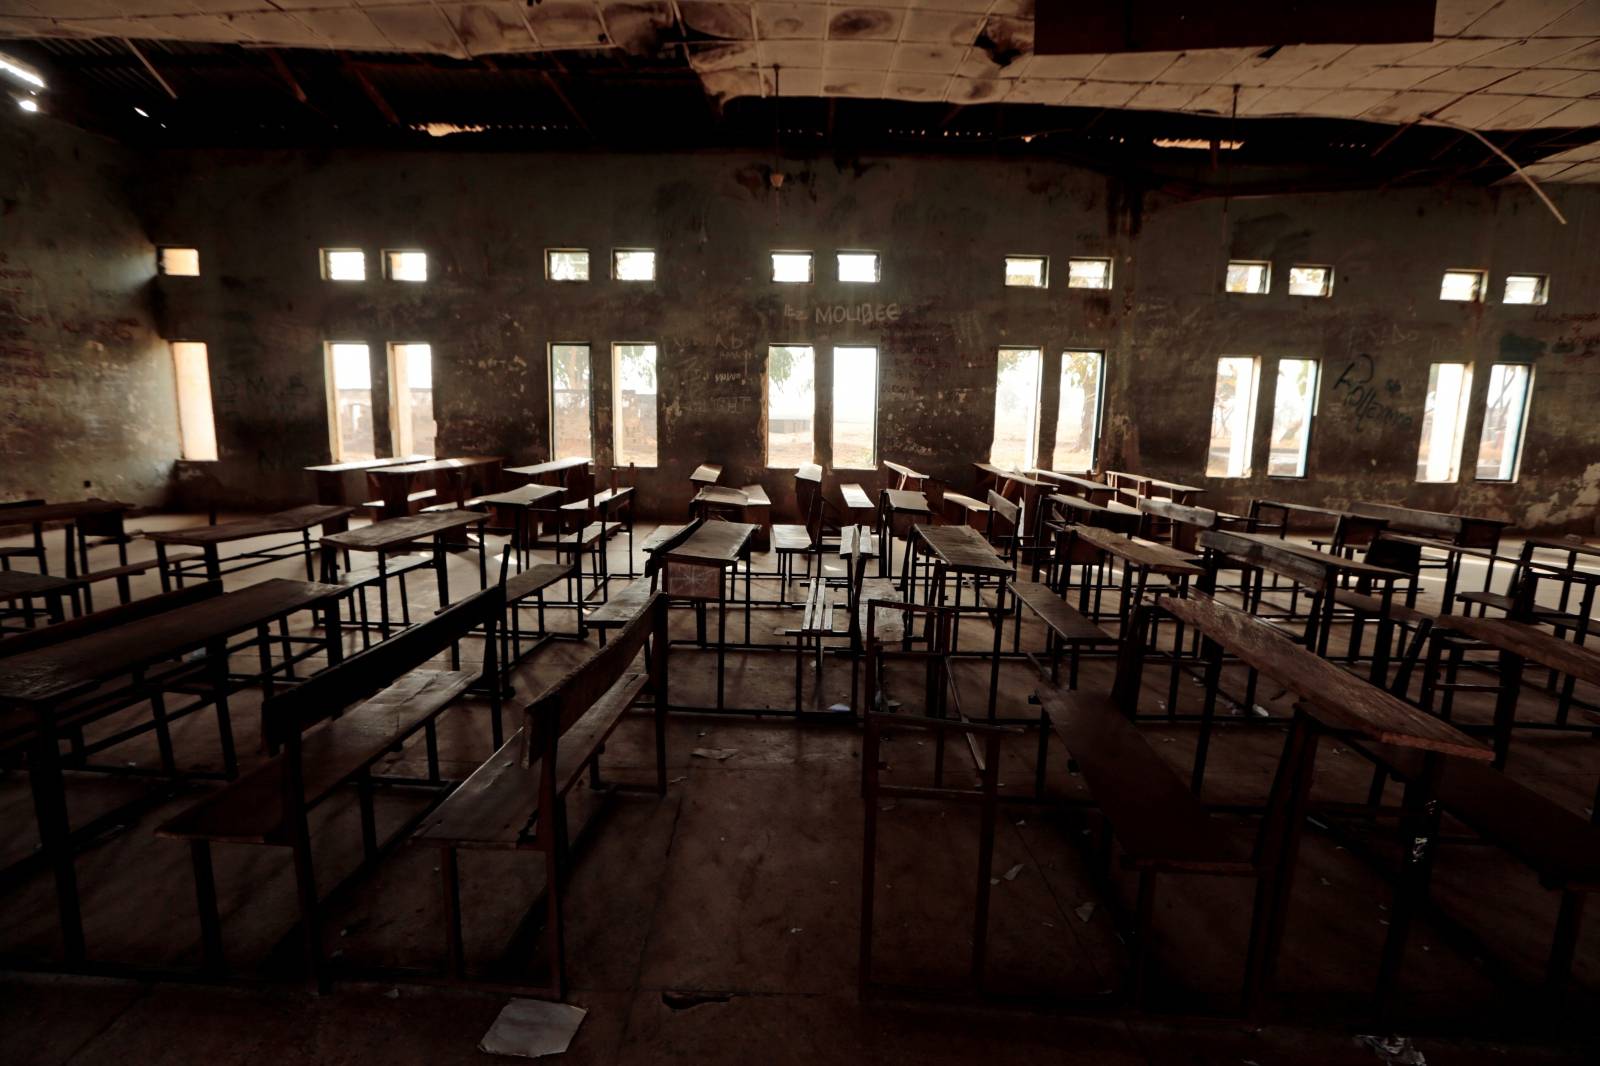 FILE PHOTO: Classroom furniture is seen arranged inside the hall at the Government Science College in Kagara